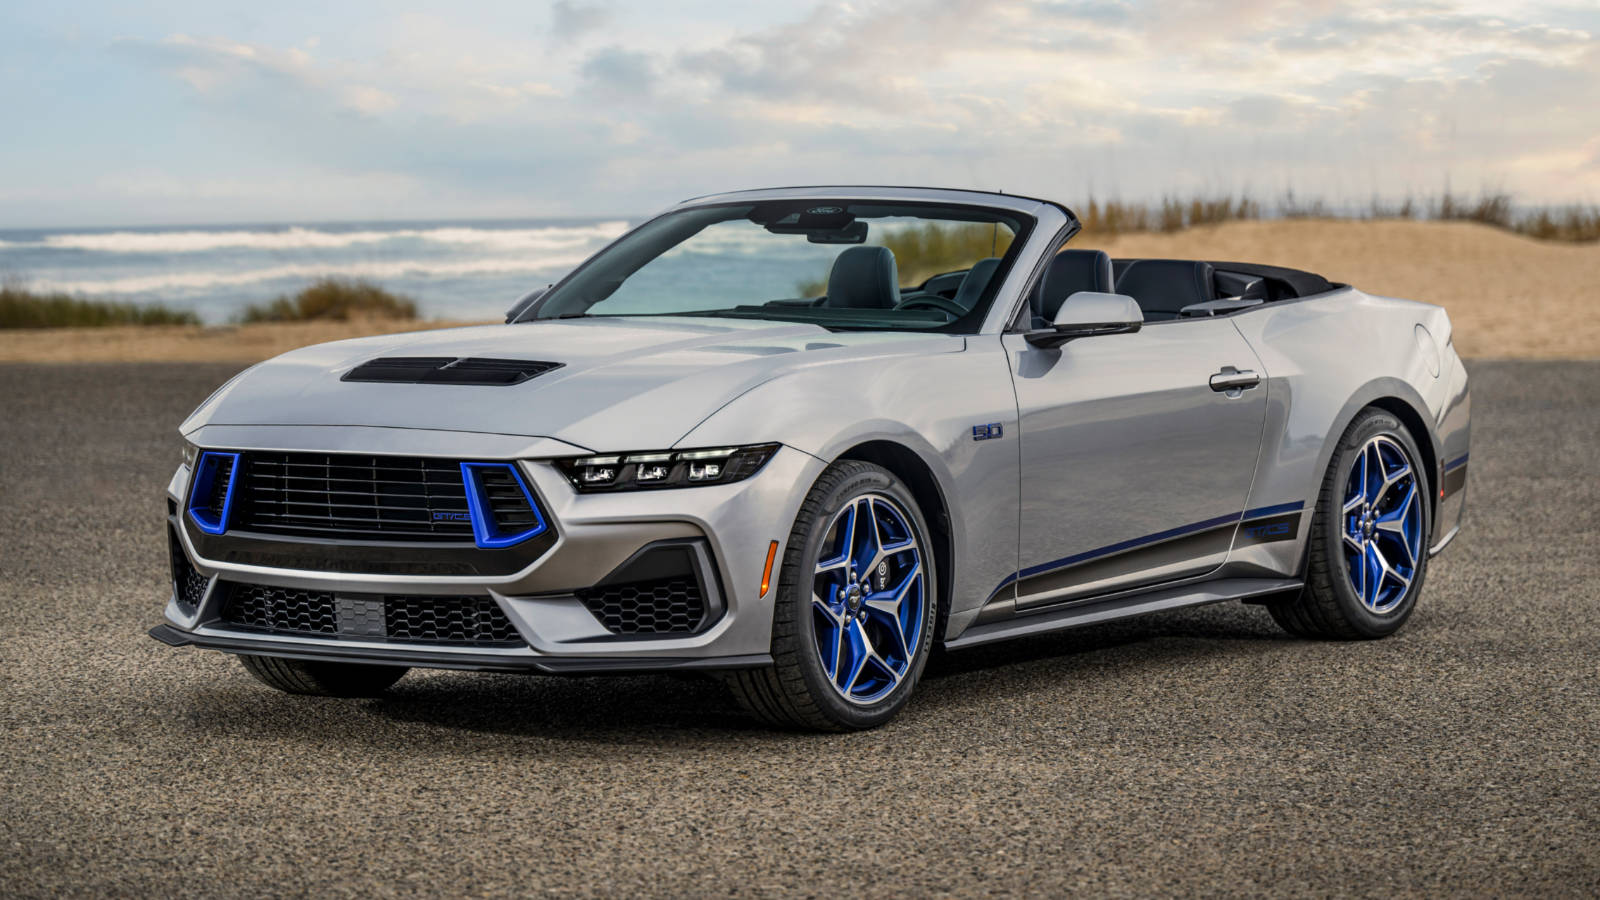 2024 Ford Mustang GT California Special Breaks Cover: Visual Highlights With Retro Cues